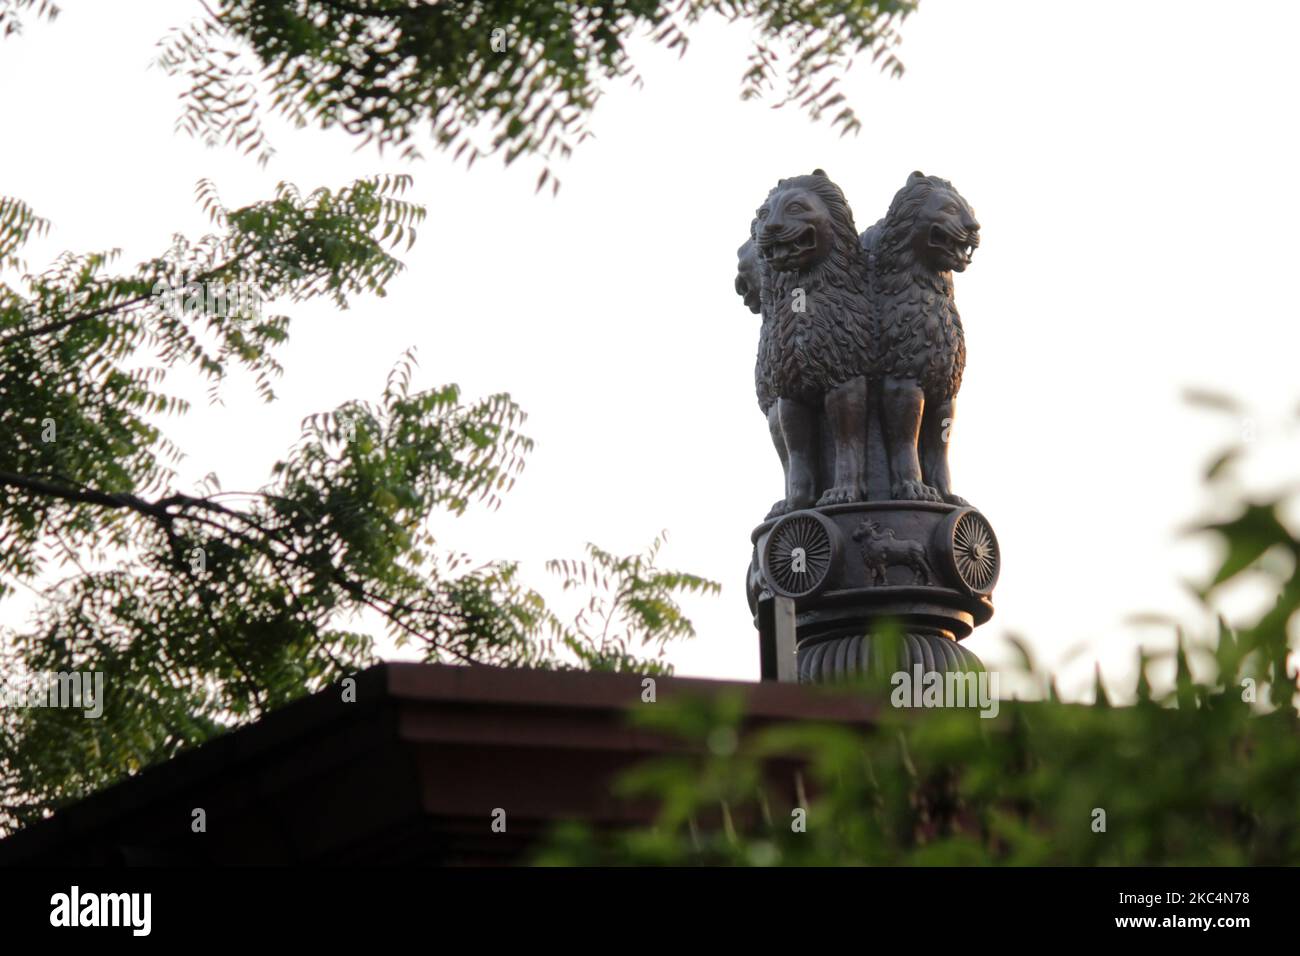 A statue of the national emblem, a depiction of the Sarnath- Lion Capital of Ashoka, on the occasion of Constitution Day at Dr. Ambedkar National Memorial in New Delhi on November 26, 2020. Constitution Day, also known as National Law Day, is celebrated in India on 26 November every year to commemorate the adoption of the Constitution of India. (Photo by Mayank Makhija/NurPhoto) Stock Photo